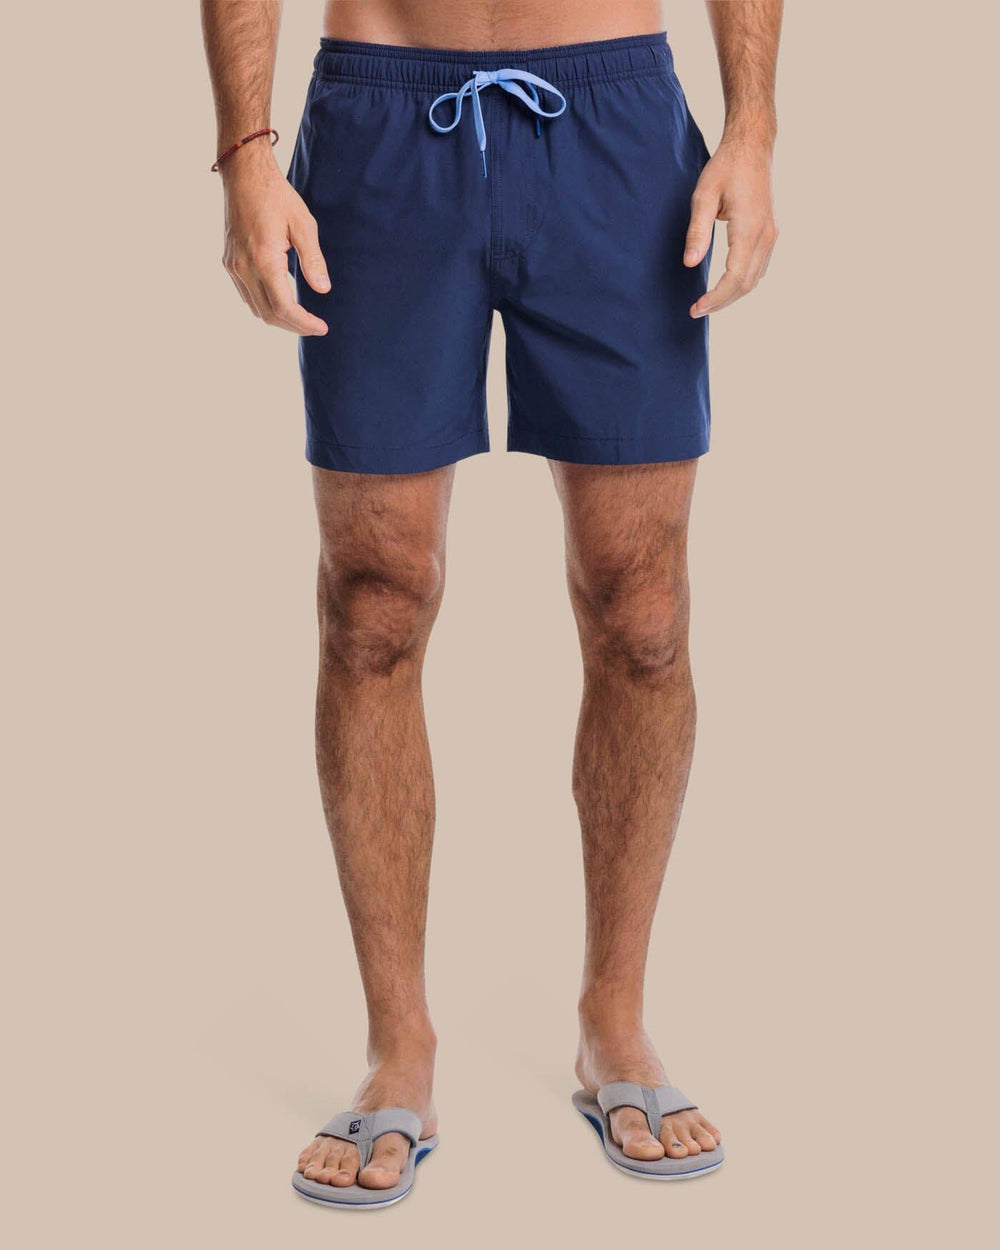 The front view of the Southern Tide Solid Swim Trunk 3 by Southern Tide - True Navy